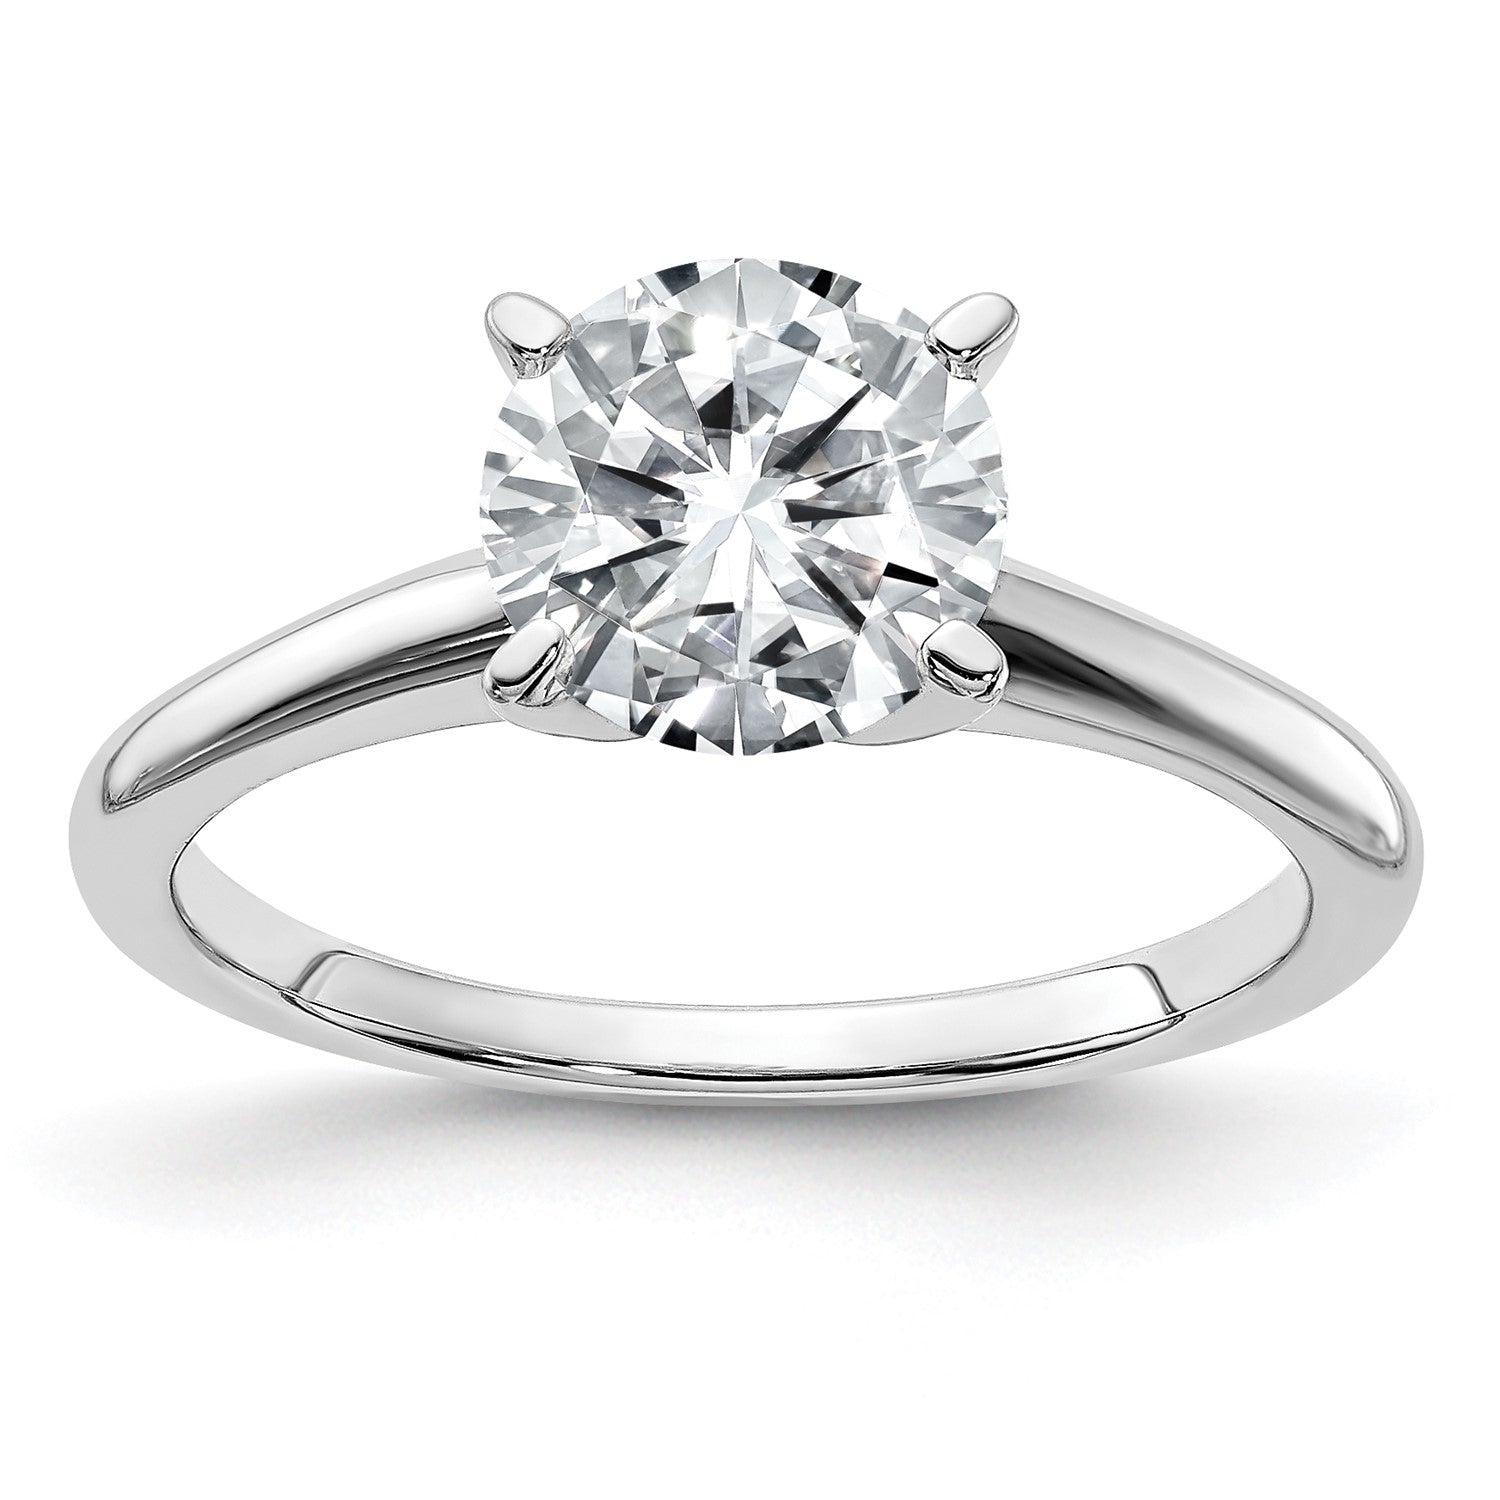 7.5MM Round Moissanite Solitaire Engagement Ring in 14KT White Gold; Size 5